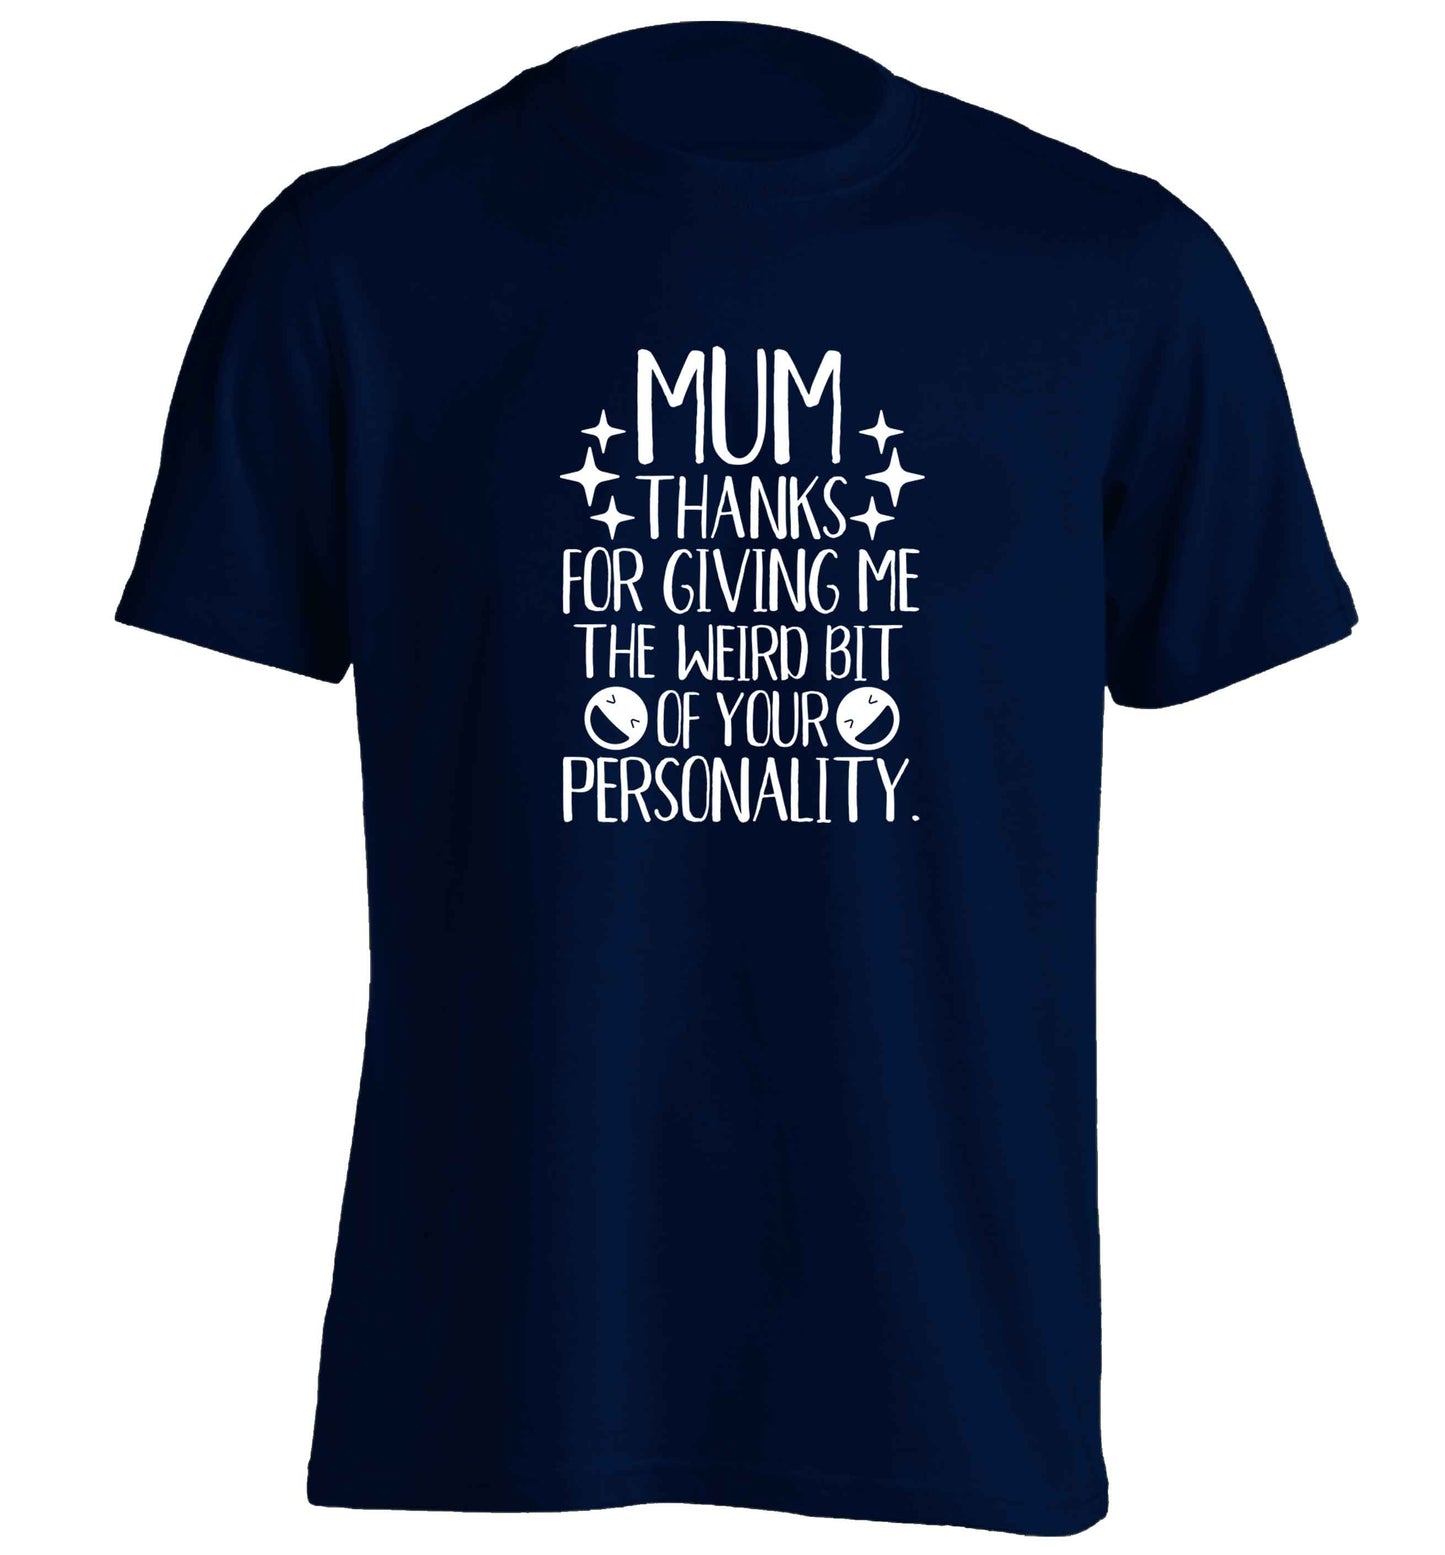 Mum thanks for giving me the weird bit of your personality adults unisex navy Tshirt 2XL